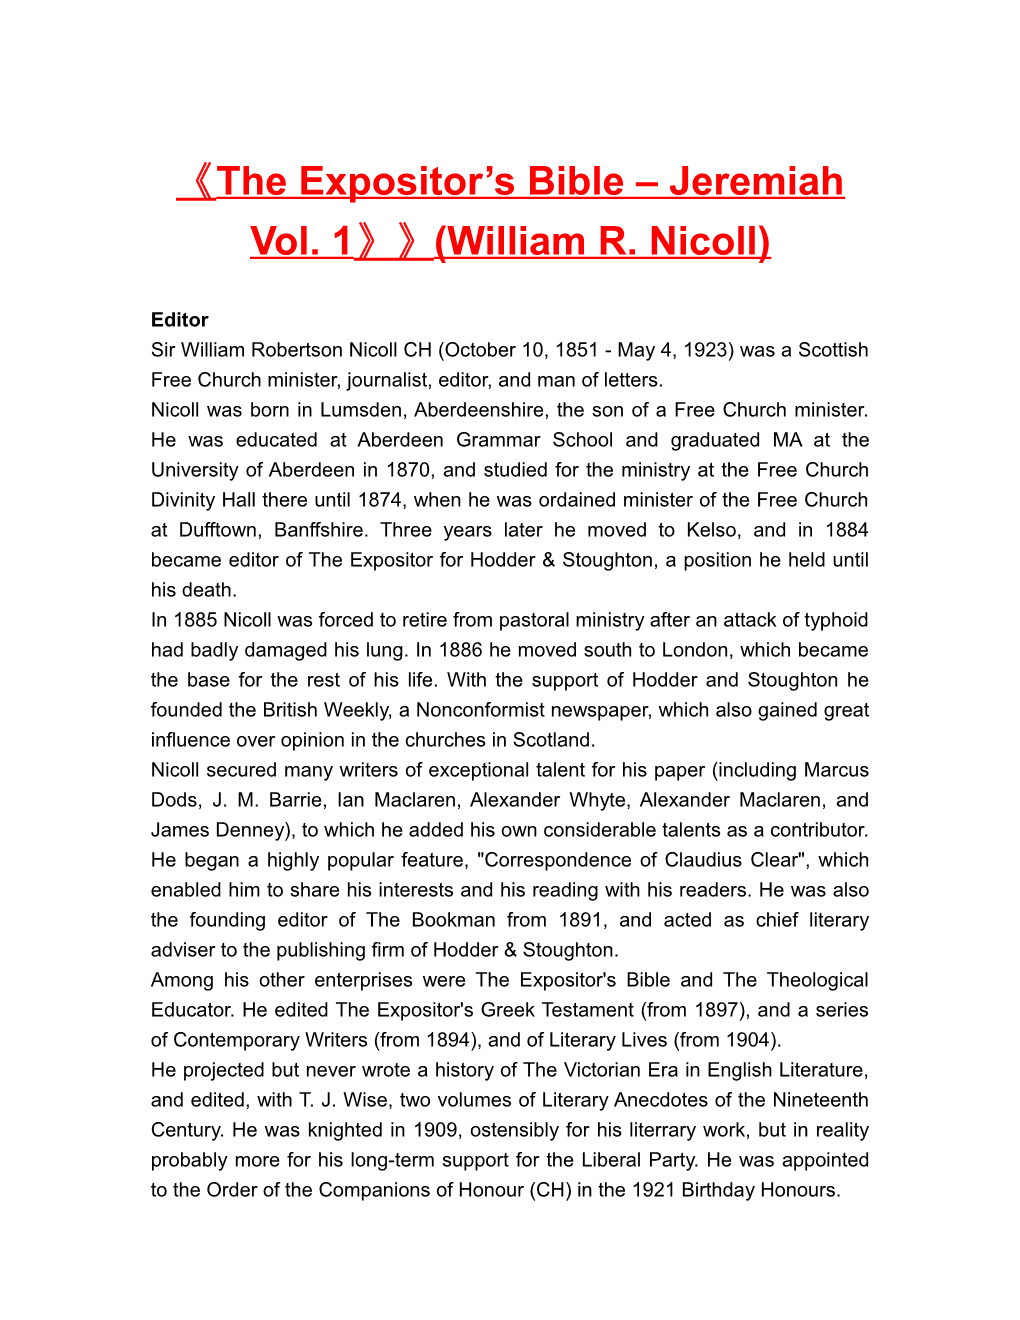 The Expositor S Bible Jeremiah Vol. 1 (William R. Nicoll)